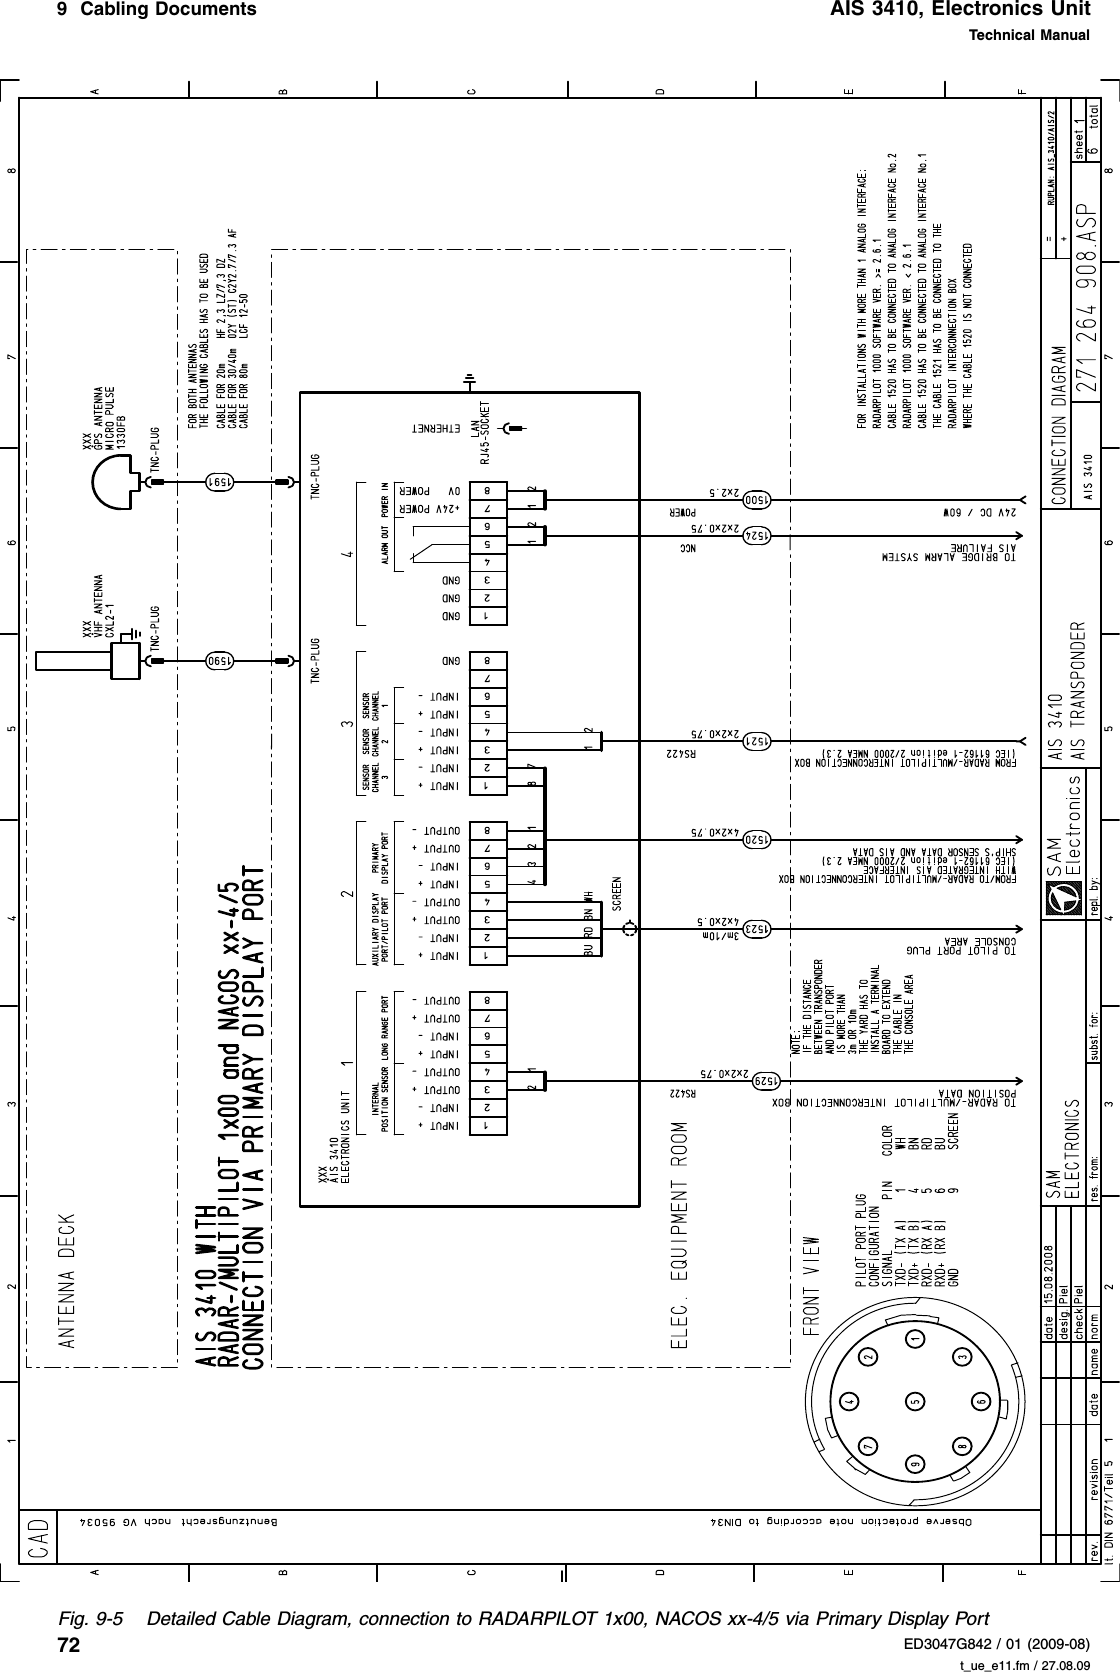 AIS 3410, Electronics UnitED3047G842 / 01 (2009-08)Technical Manual9  Cabling Documents   t_ue_e11.fm / 27.08.0972Fig. 9-5 Detailed Cable Diagram, connection to RADARPILOT 1x00, NACOS xx-4/5 via Primary Display Port